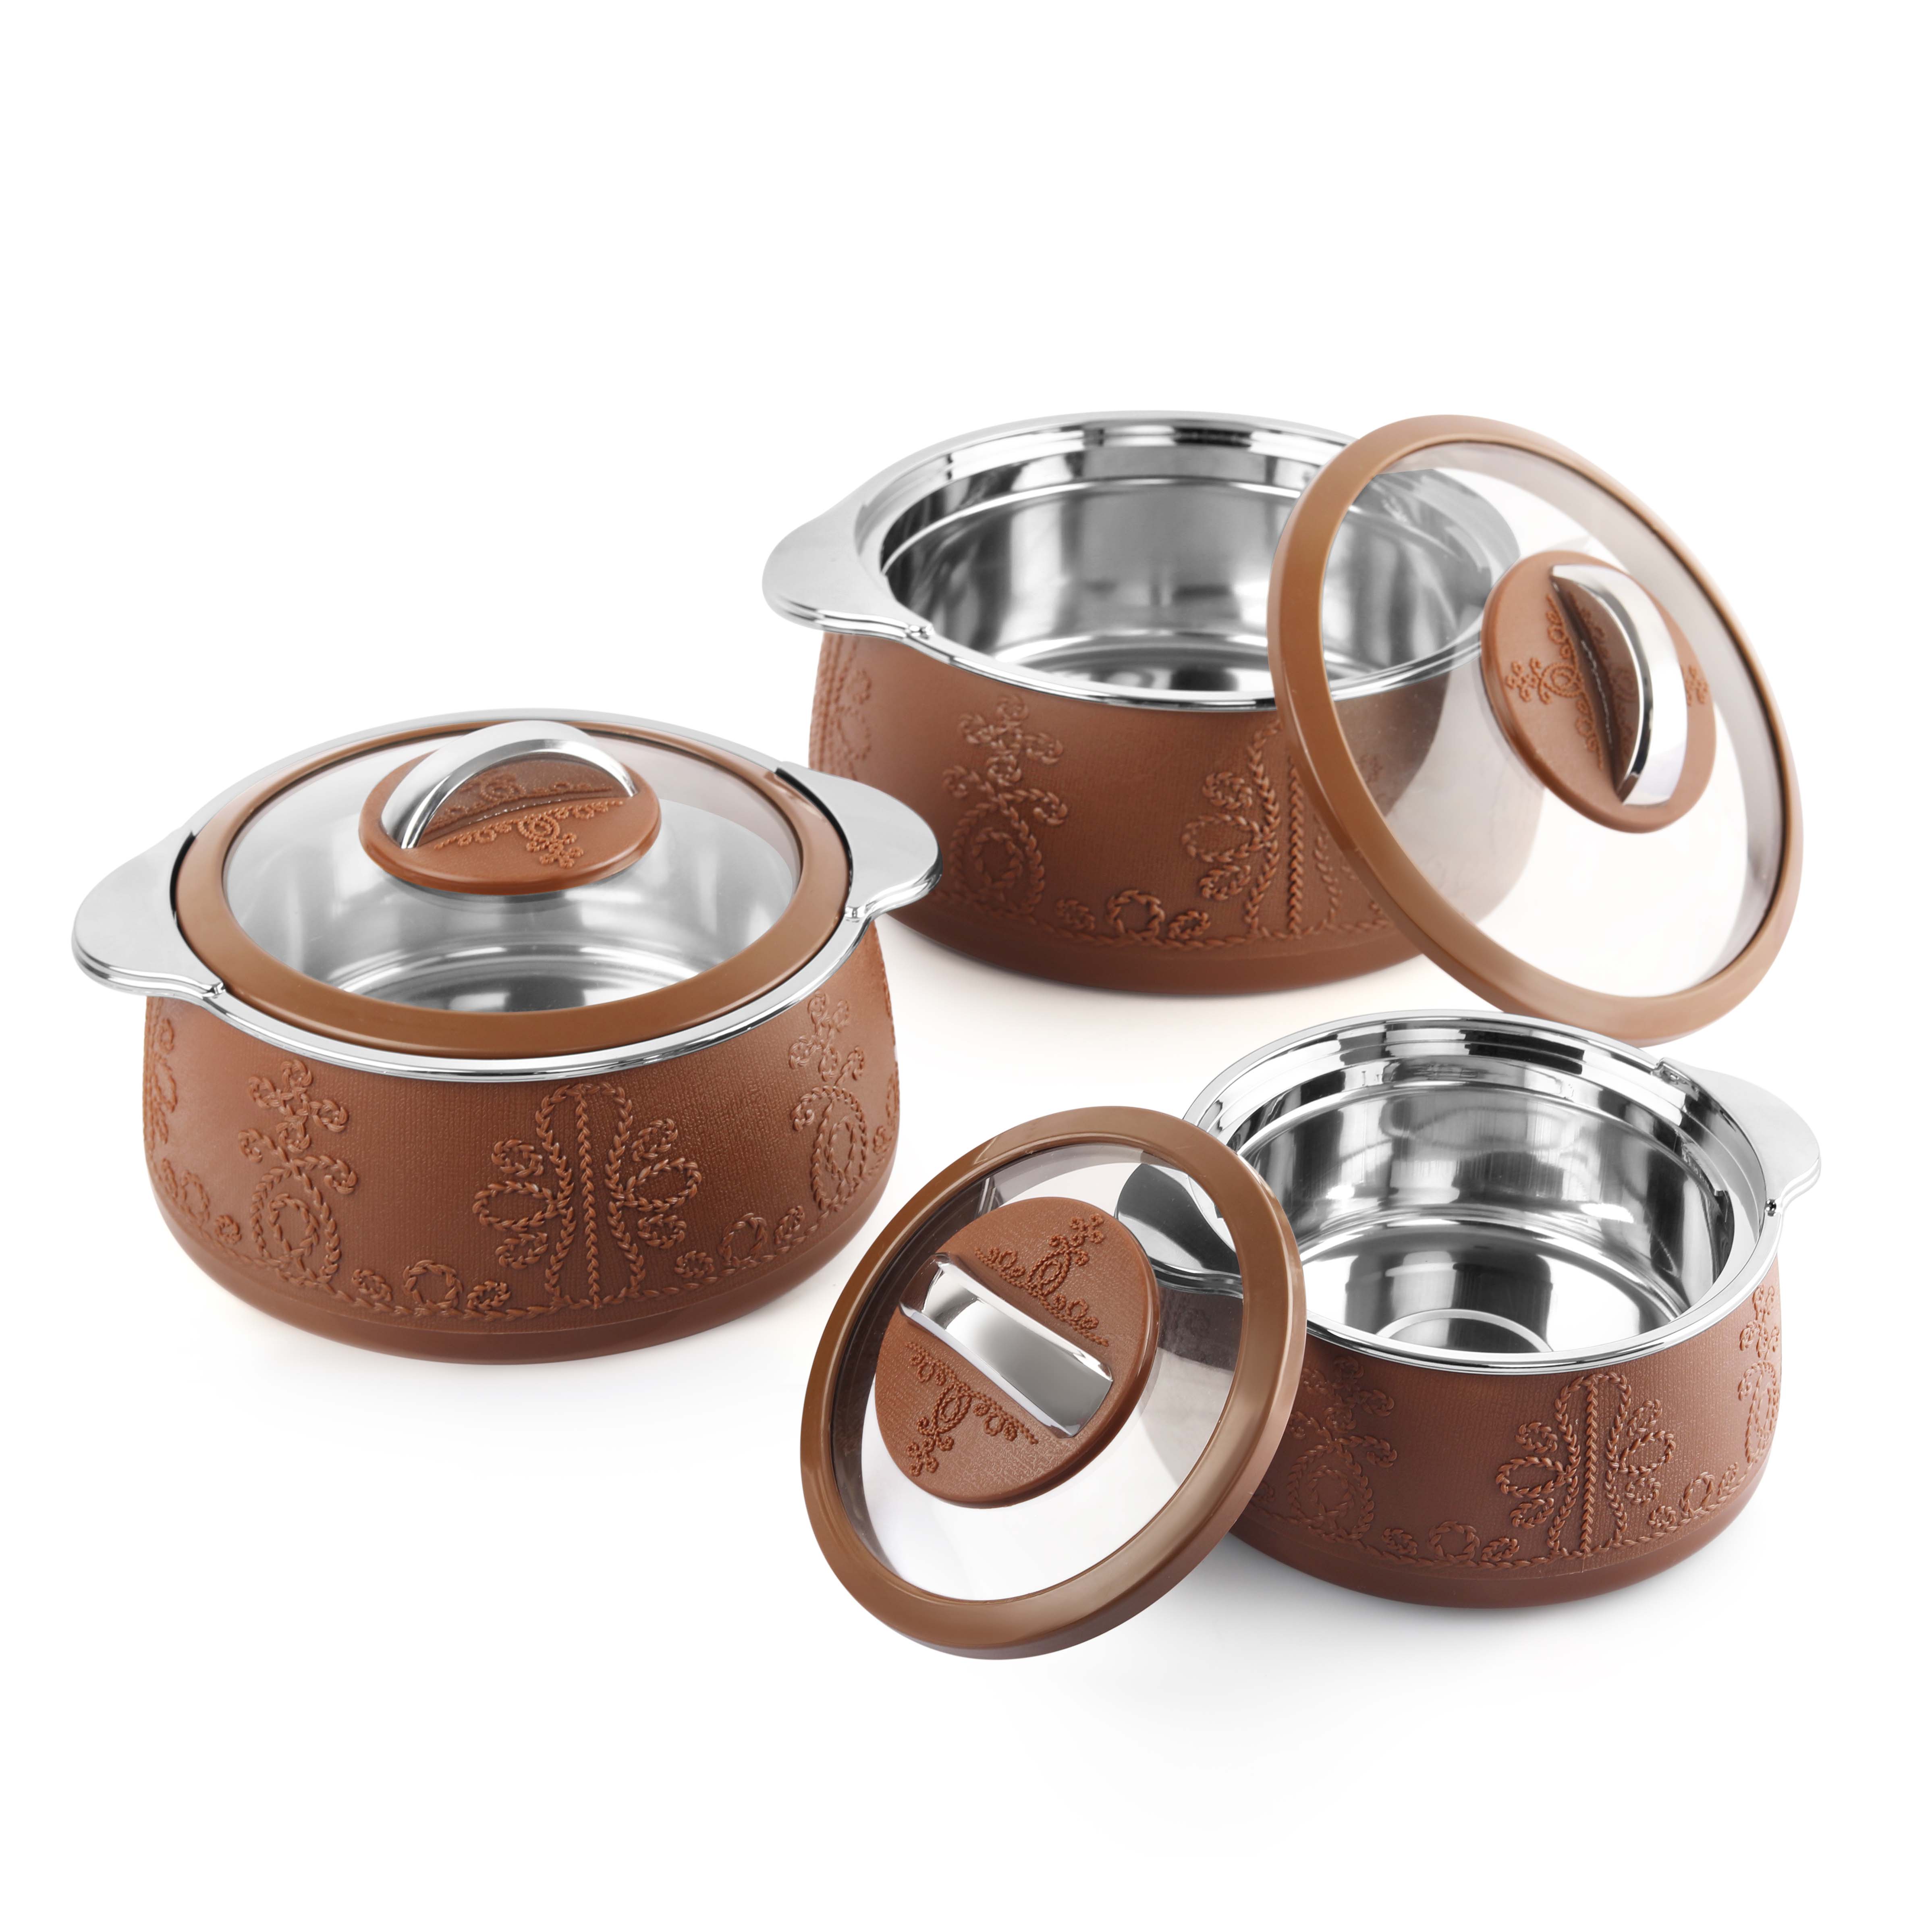 Royale Insulated Casserole, Set of 3 Brown / 600ml+1100ml+1600ml